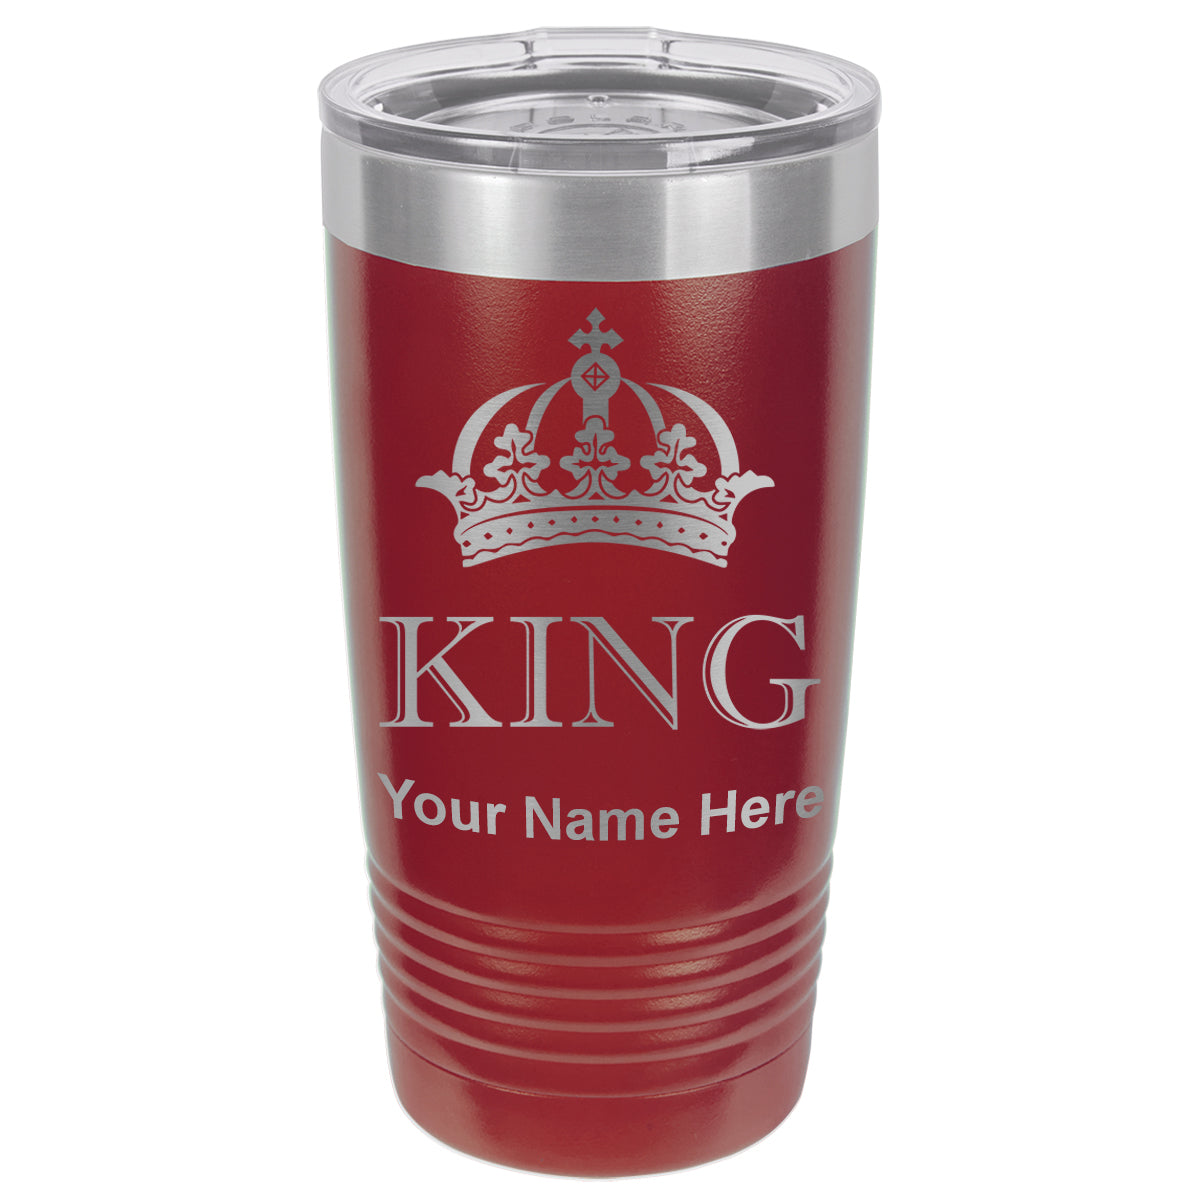 20oz Vacuum Insulated Tumbler Mug, King Crown, Personalized Engraving Included